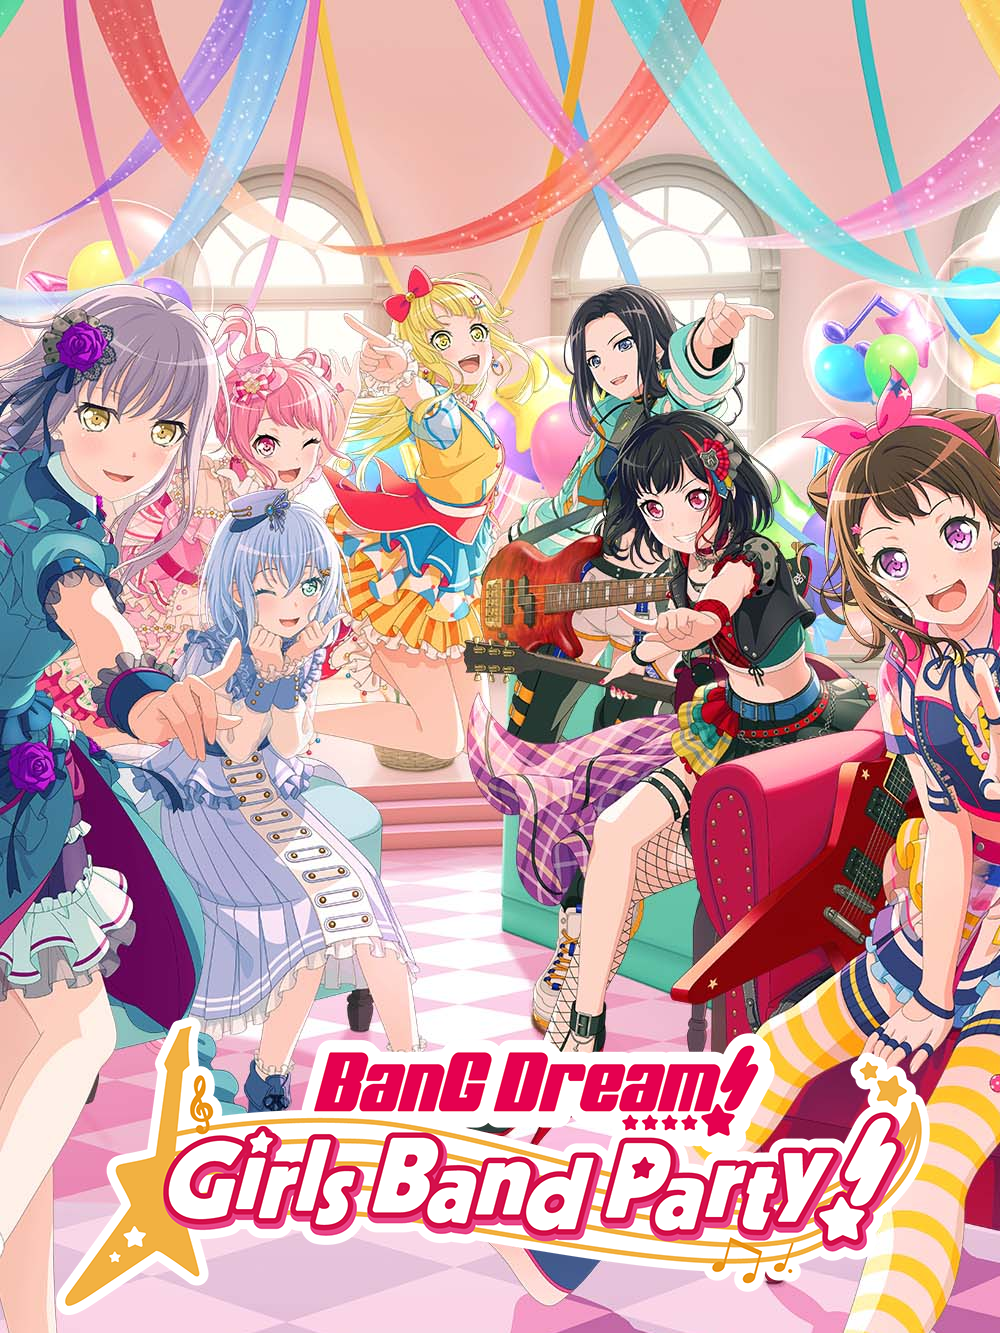 BanG Dream! Girls Band Party Events - Wiki  Bandori Party - BanG Dream!  Girls Band Party